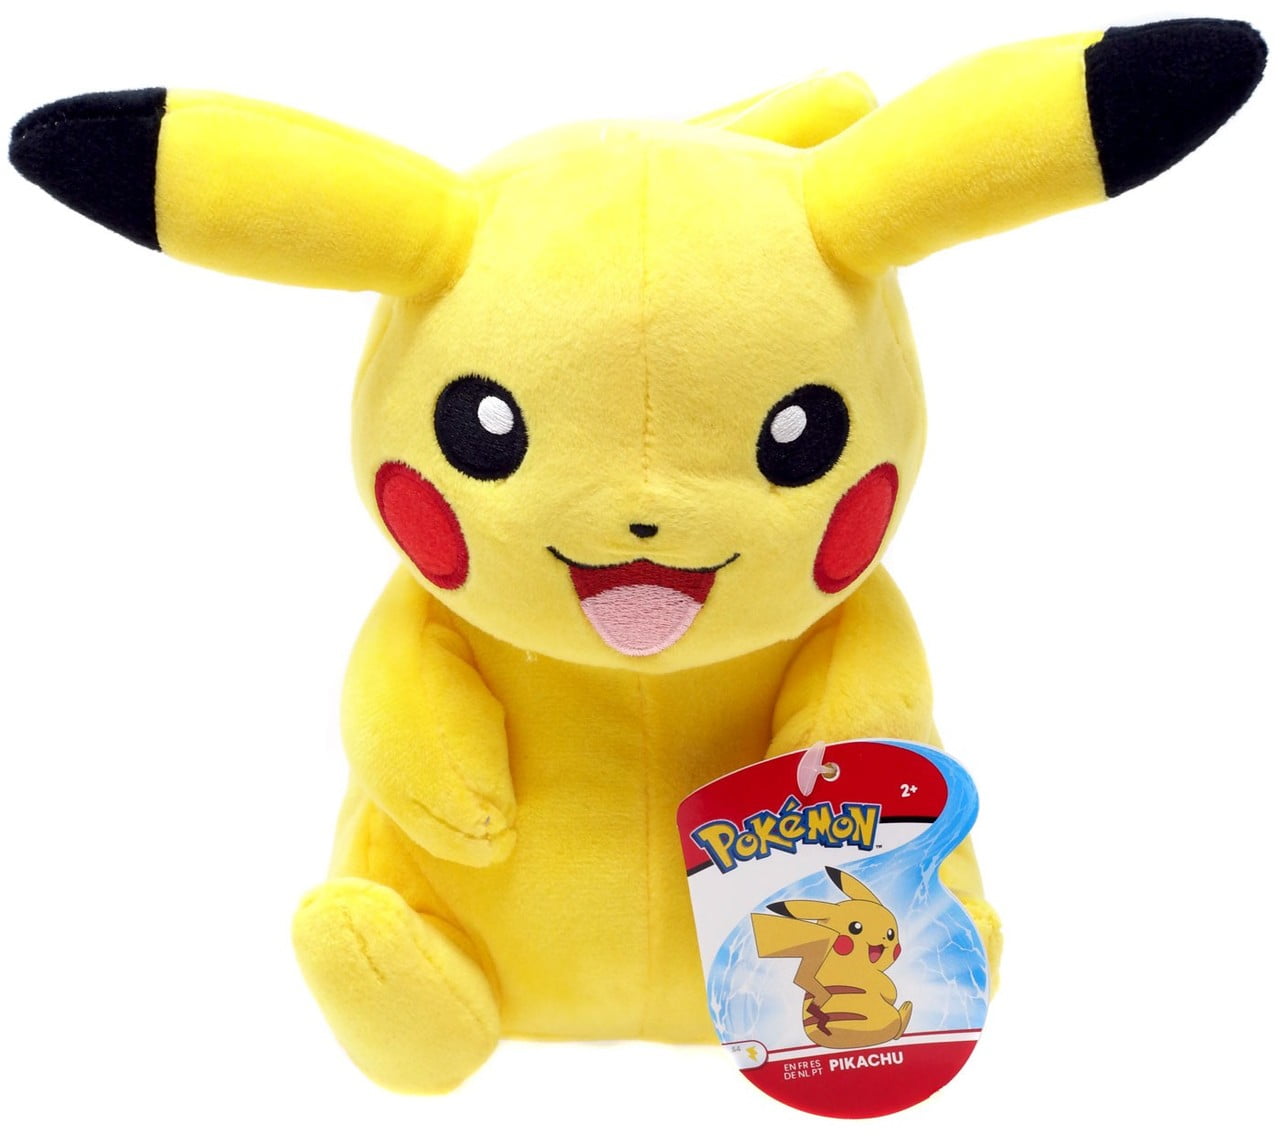 Pokémon 8 Pikachu Plush - Officially Licensed - Quality & Soft Stuffed  Animal Toy - Generation One - Great Gift for Kids, Boys, Girls & Fans of